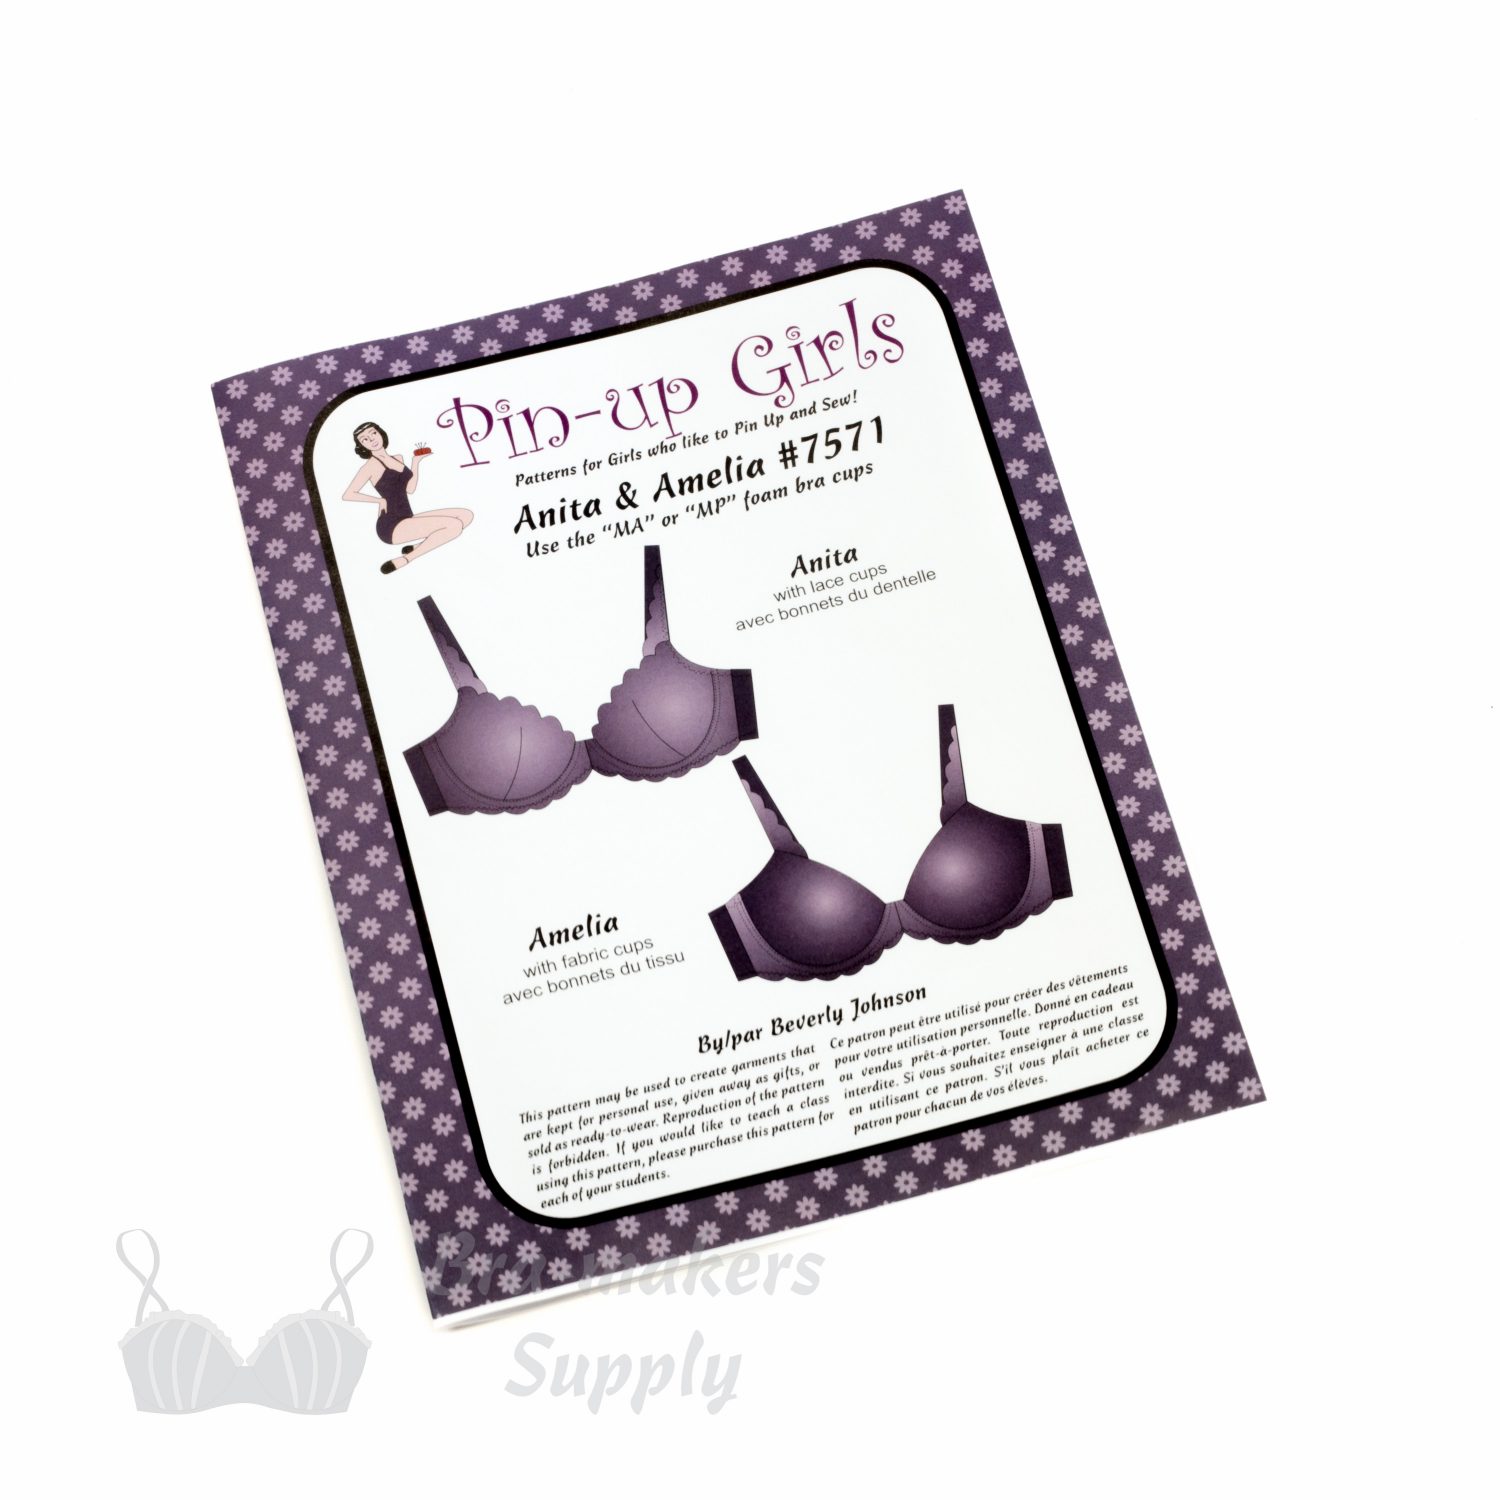 T Shirt Foam Cup Bra With Lace Pattern Bra Makers Supply 